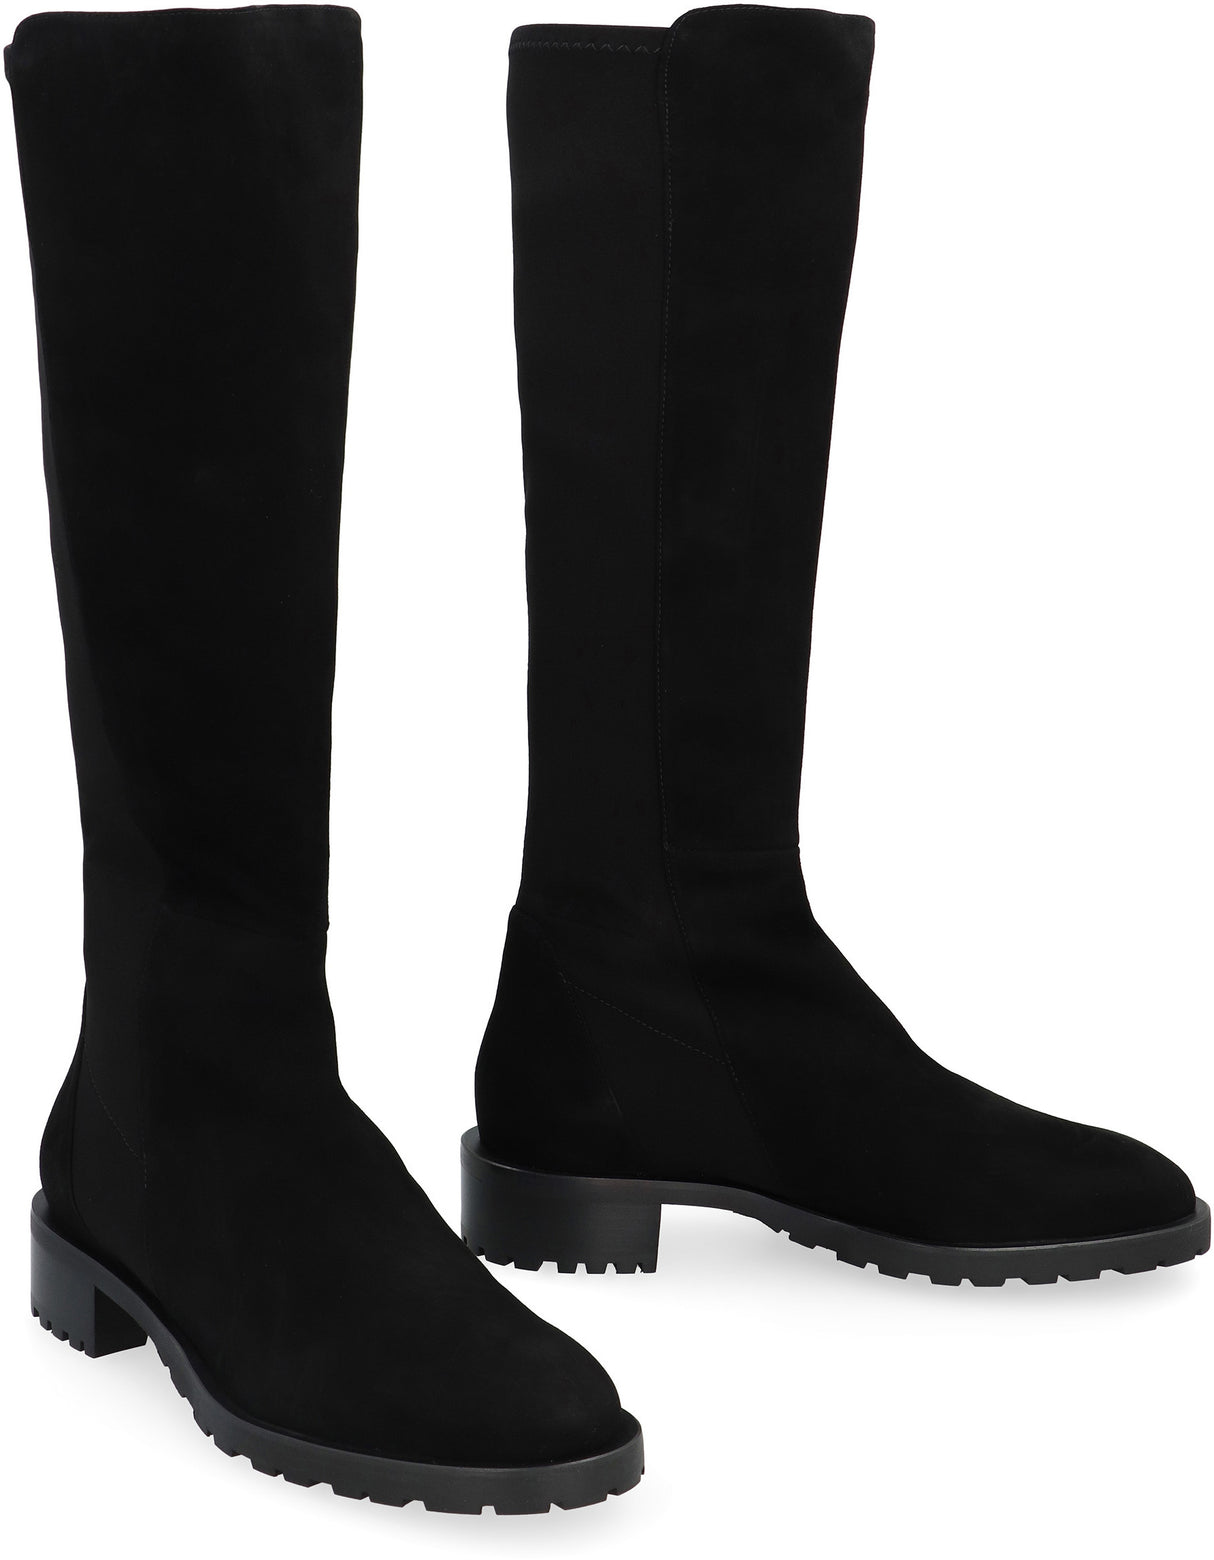 Black Leather and Stretch Fabric Boots for Women - FW23 Collection